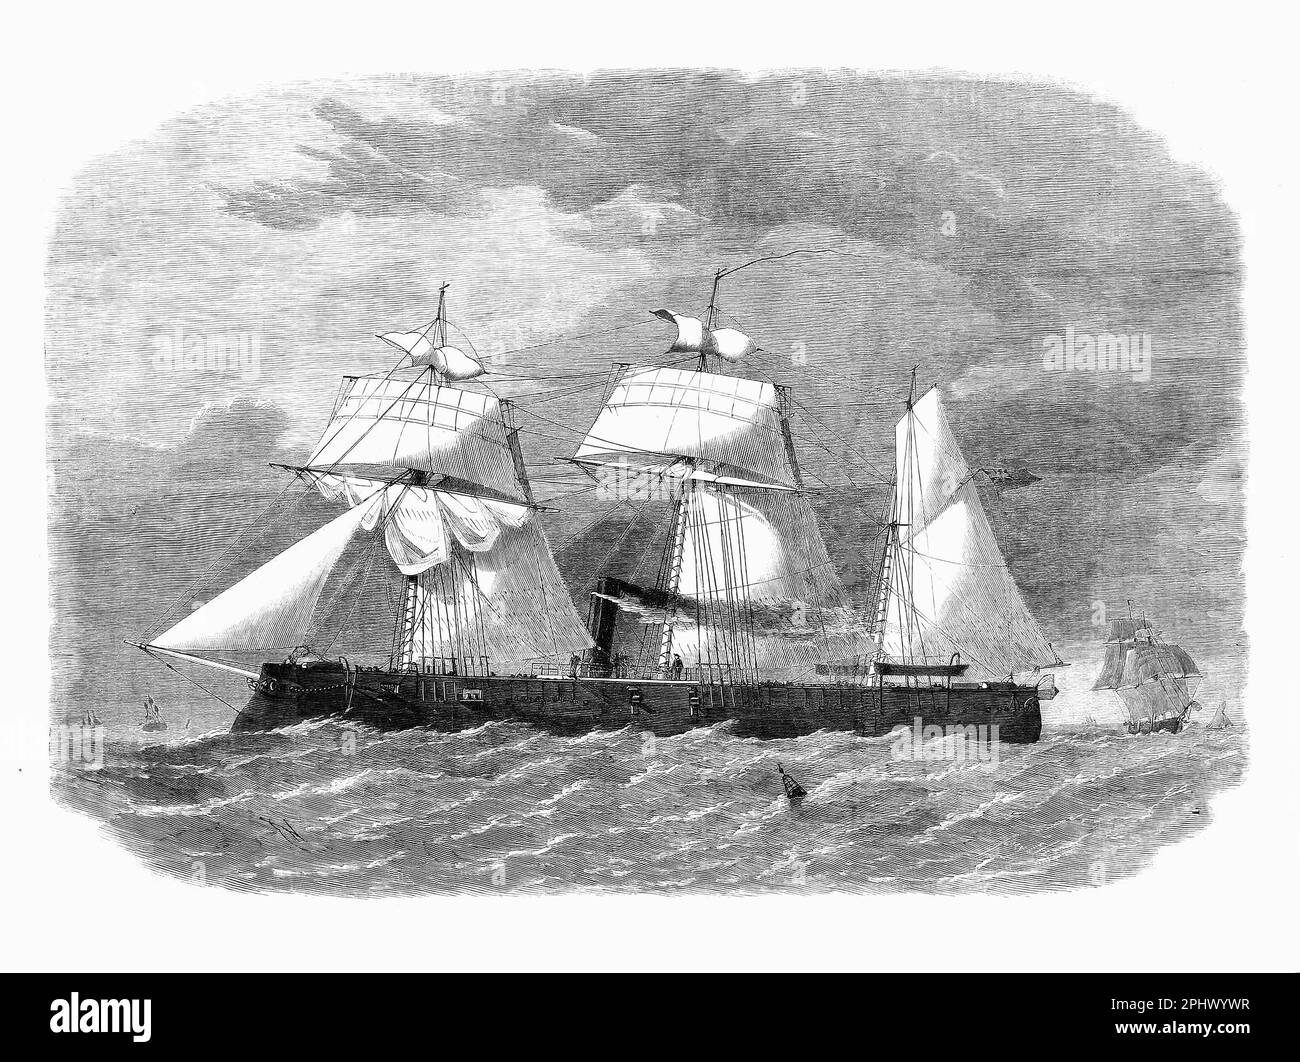 The seventh HMS Enterprise of the Royal Navy was an armoured sloop launched in 1864 at Deptford Dockyard. Originally laid down as a wooden screw sloop of the Camelion class, she was redesigned by Edward Reed and completed as a central battery ironclad. The ship spent the bulk of her career assigned to the Mediterranean Fleet before returning to England in 1871 where she was paid off. Enterprise was sold for scrap in 1885. Stock Photo